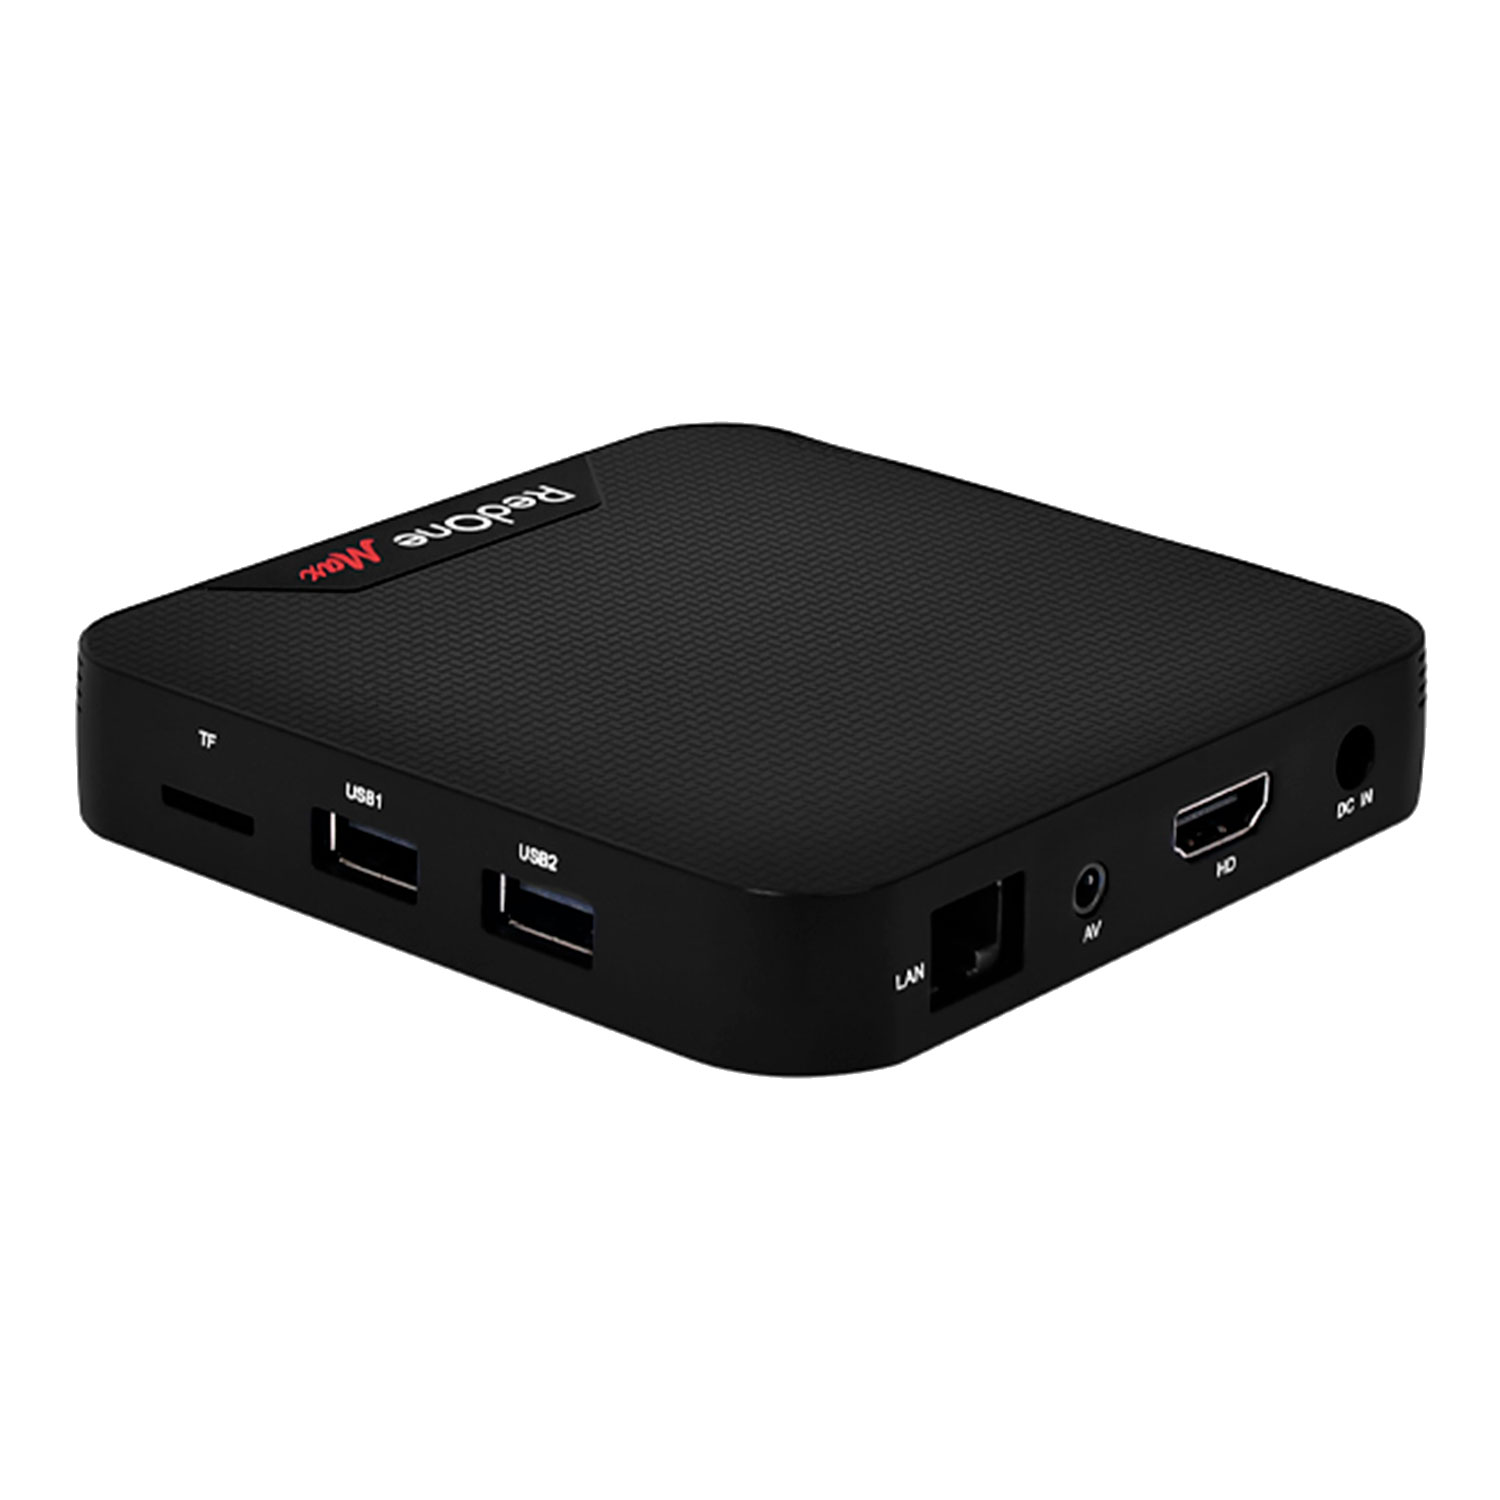 Receptor Red One Max 2GB RAM / 8GB / Wifi / 4K / Android 10 - Preto